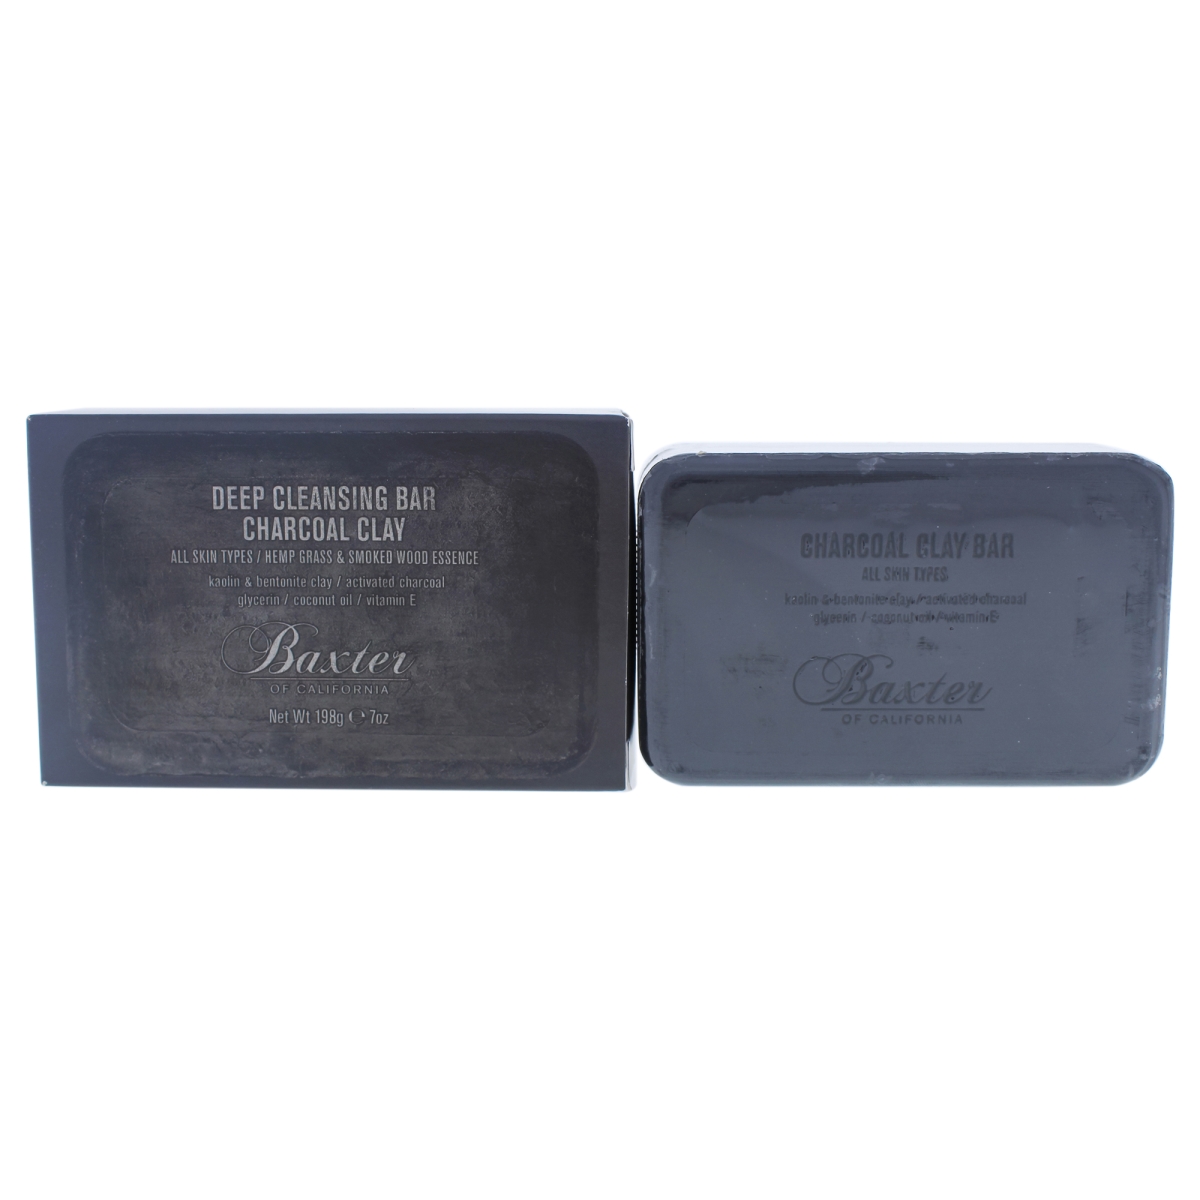 I0090480 Deep Cleansing Soap Bar For Men - Charcoal Clay - 7 Oz